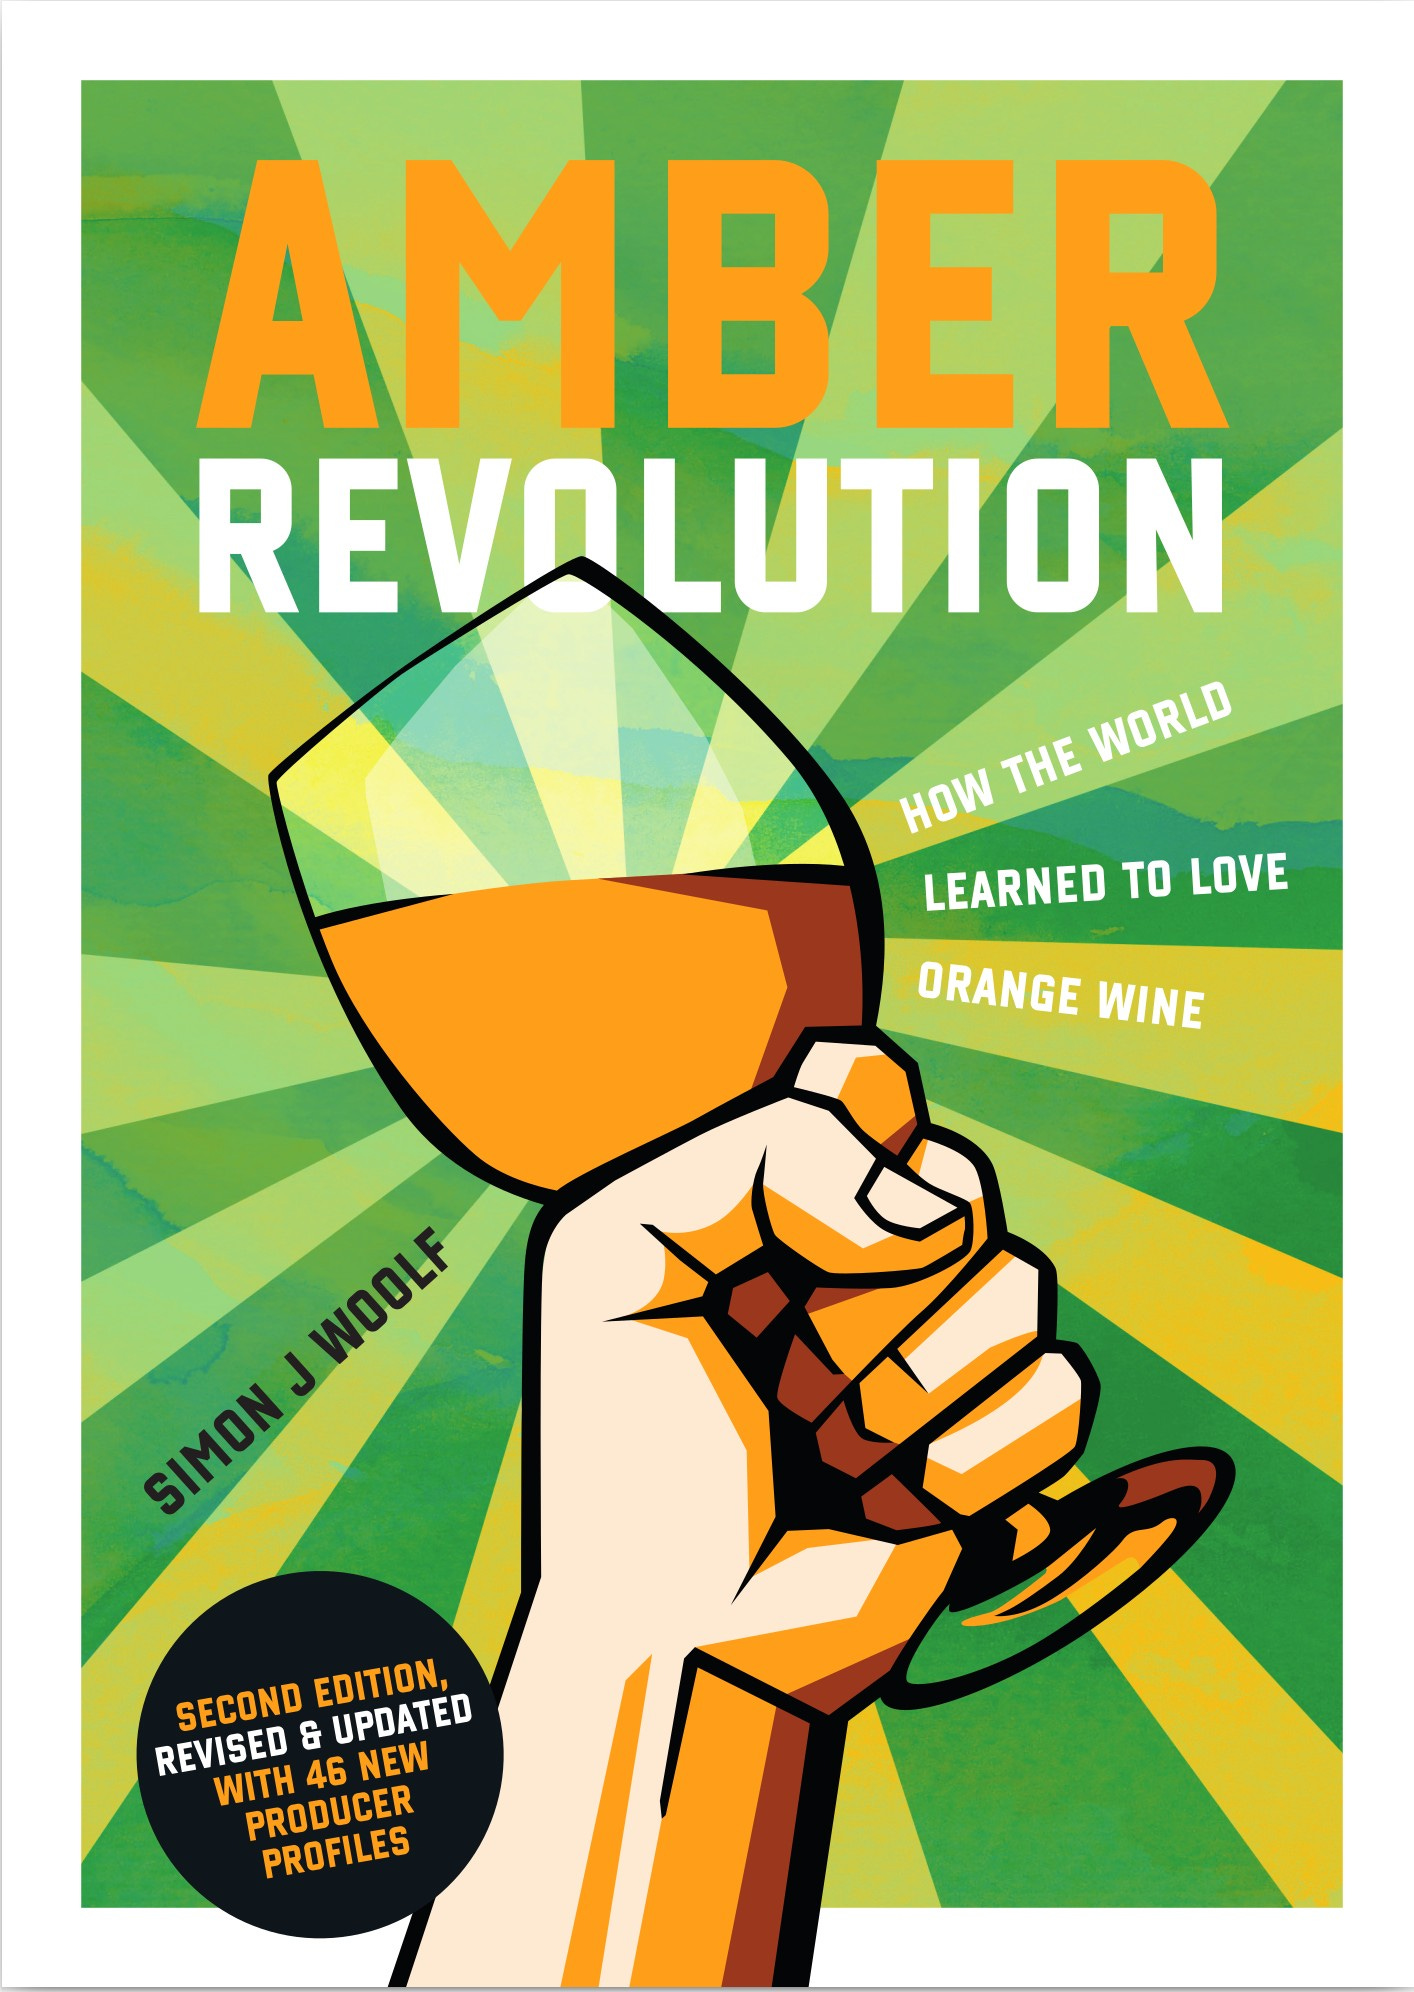 Buy Amber Revolution to read more about these and other great orange wines.